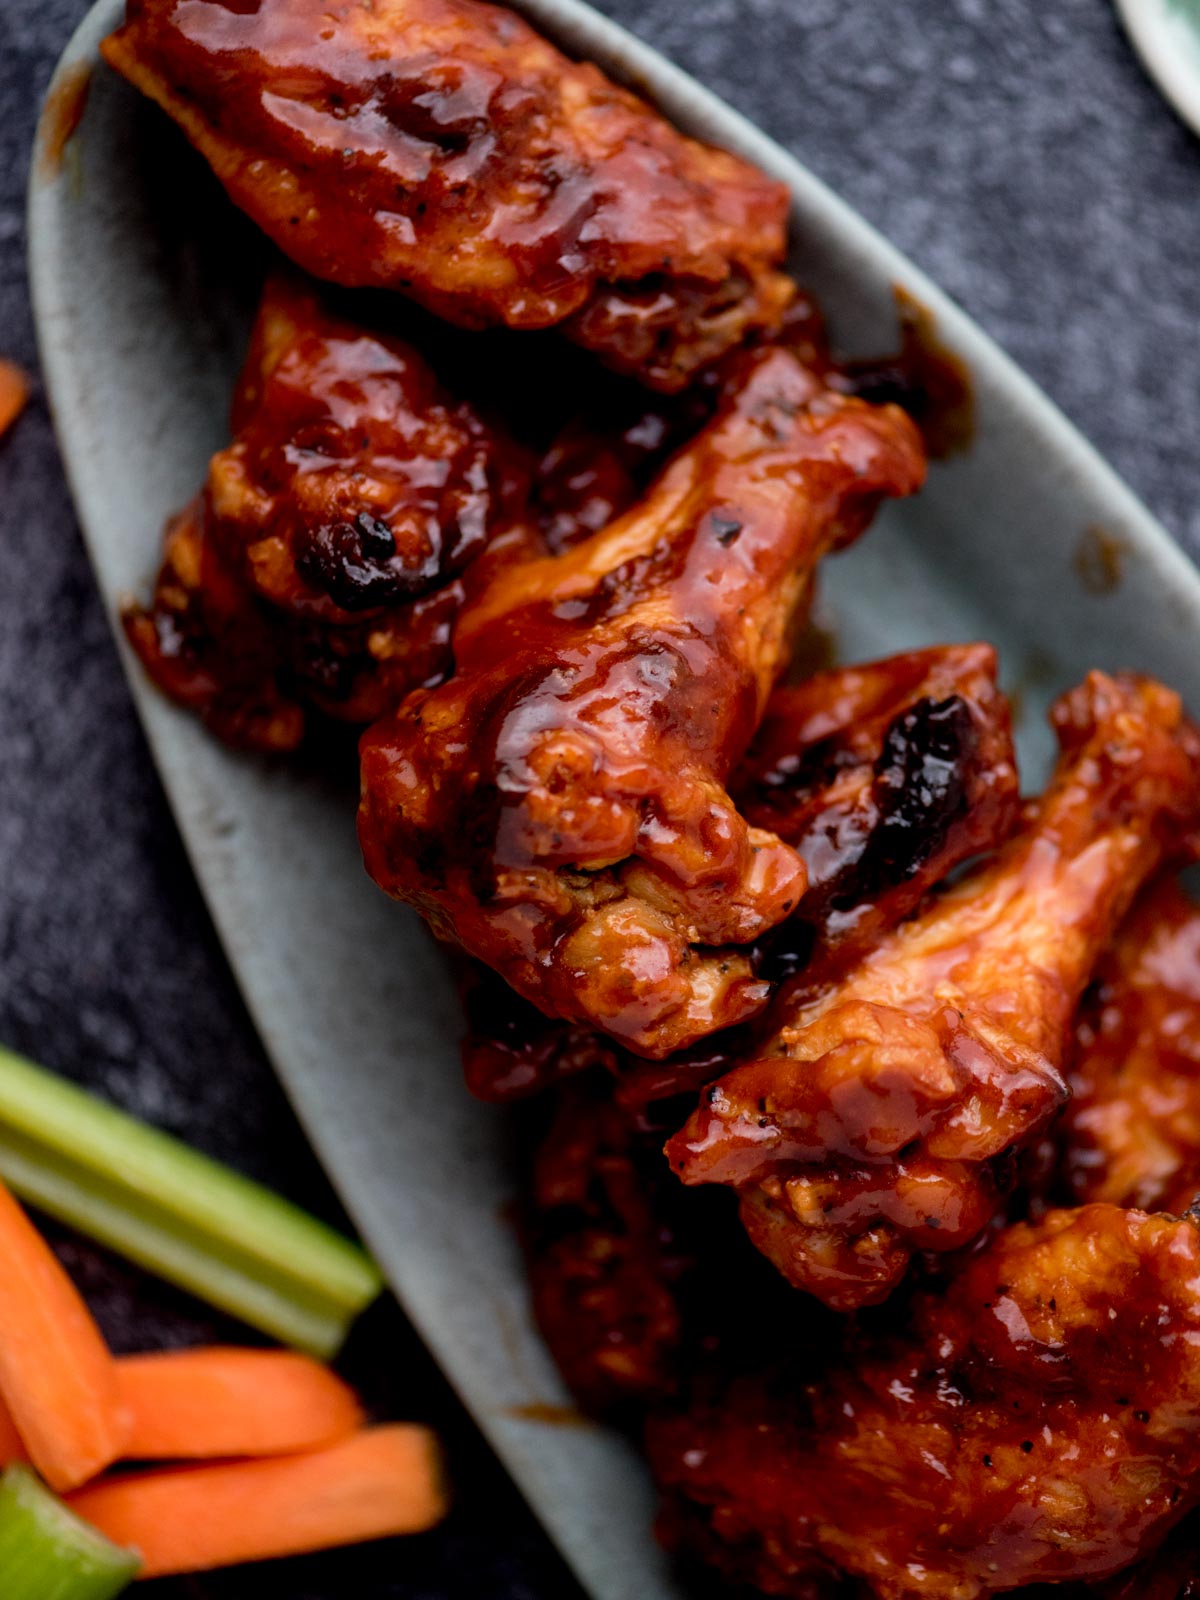 Saucy bbq chicken wings served on an oval platter.